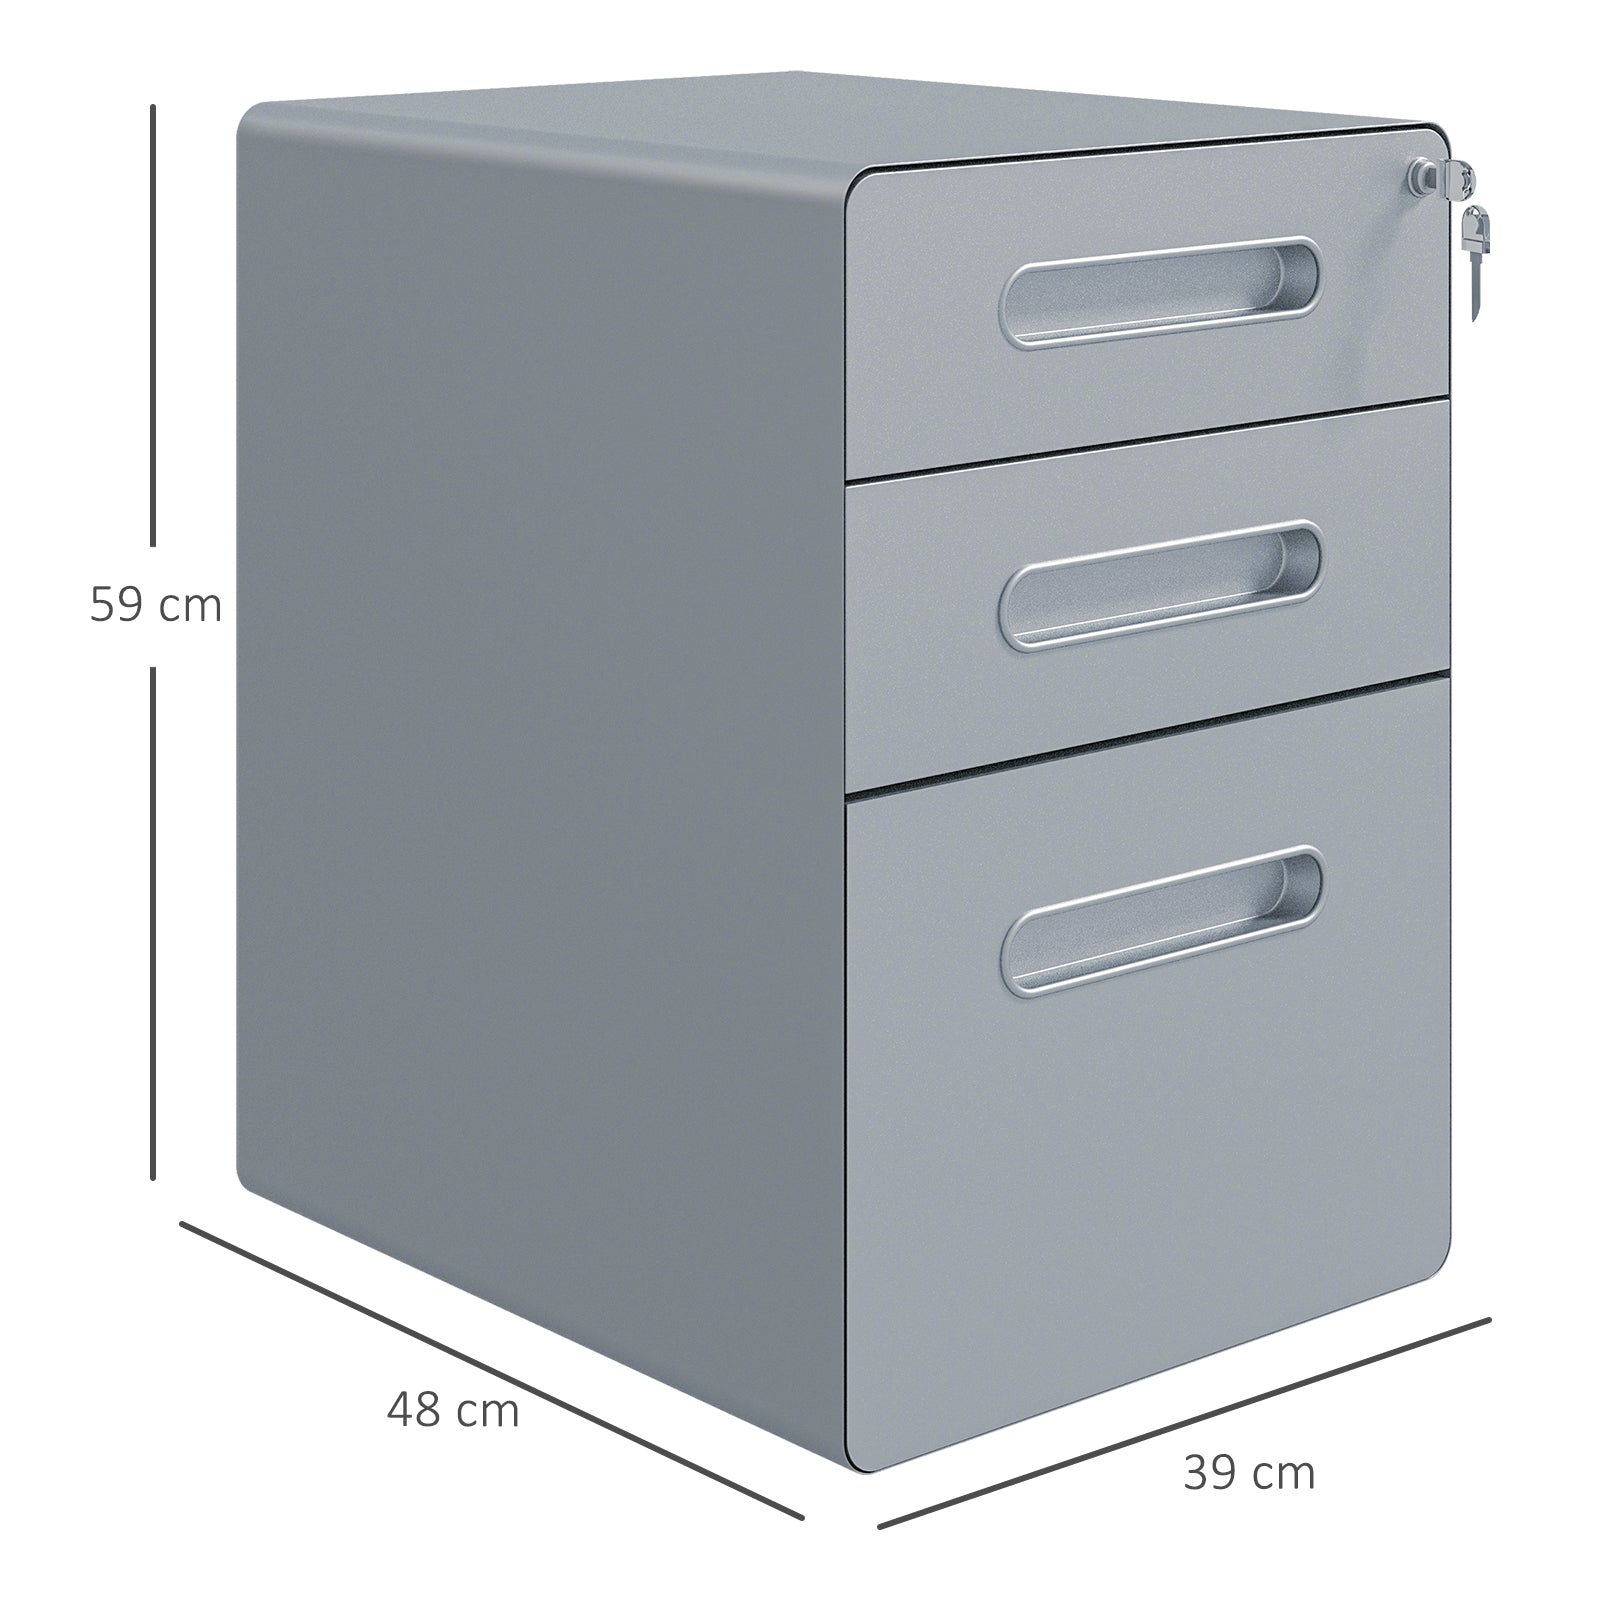 Lockable Cabinet, Rolling Filing Cabinet with 3 Drawers, Steel Office Drawer Unit for A4, Letter, Legal Sized Files-2